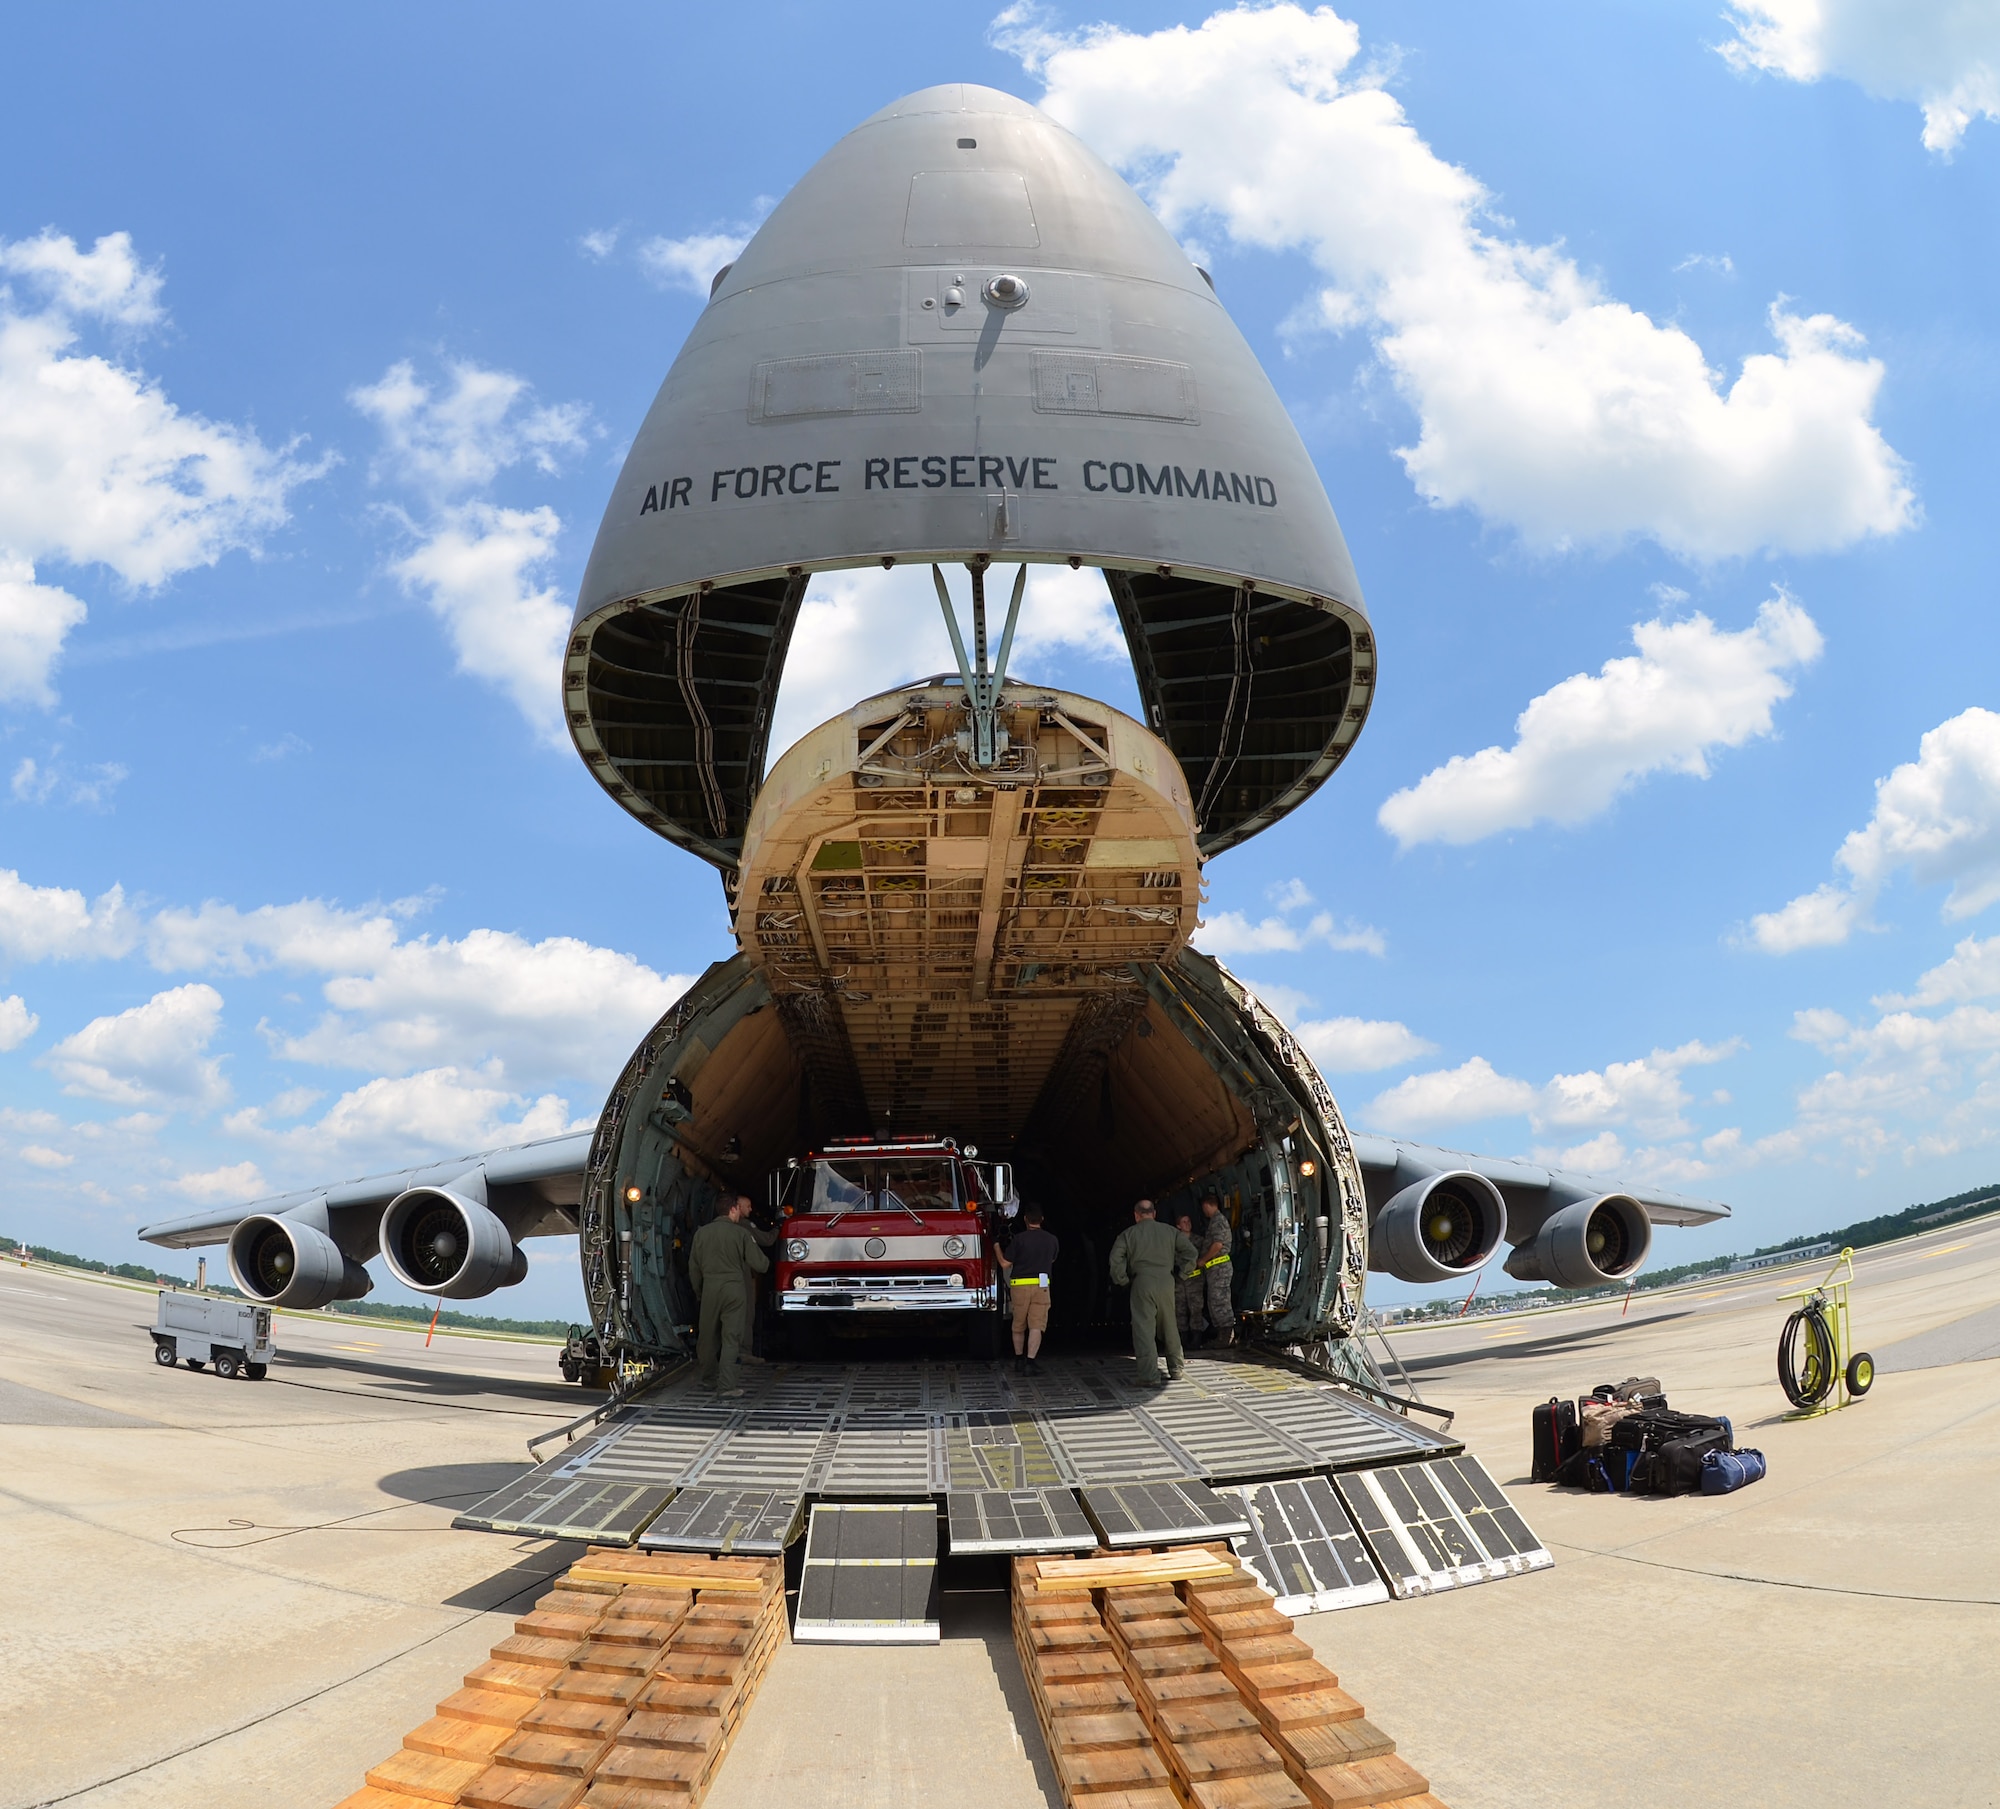 A Ford Horton Ambulance, a Ford 8000 Pierce Pumper and a Ford C-8000 Pirsch Pumper are loaded into the Westover C-5 Galaxy aircraft at JB-Charleston June 9, 2014. The cargo was delivered to Managua, Nicaragua June 10, on behalf of the Wisconsin/Nicaragua Partners of the Americas, Incorporated. (U.S. Air Force photo/SSgt. Kelly Goonan)